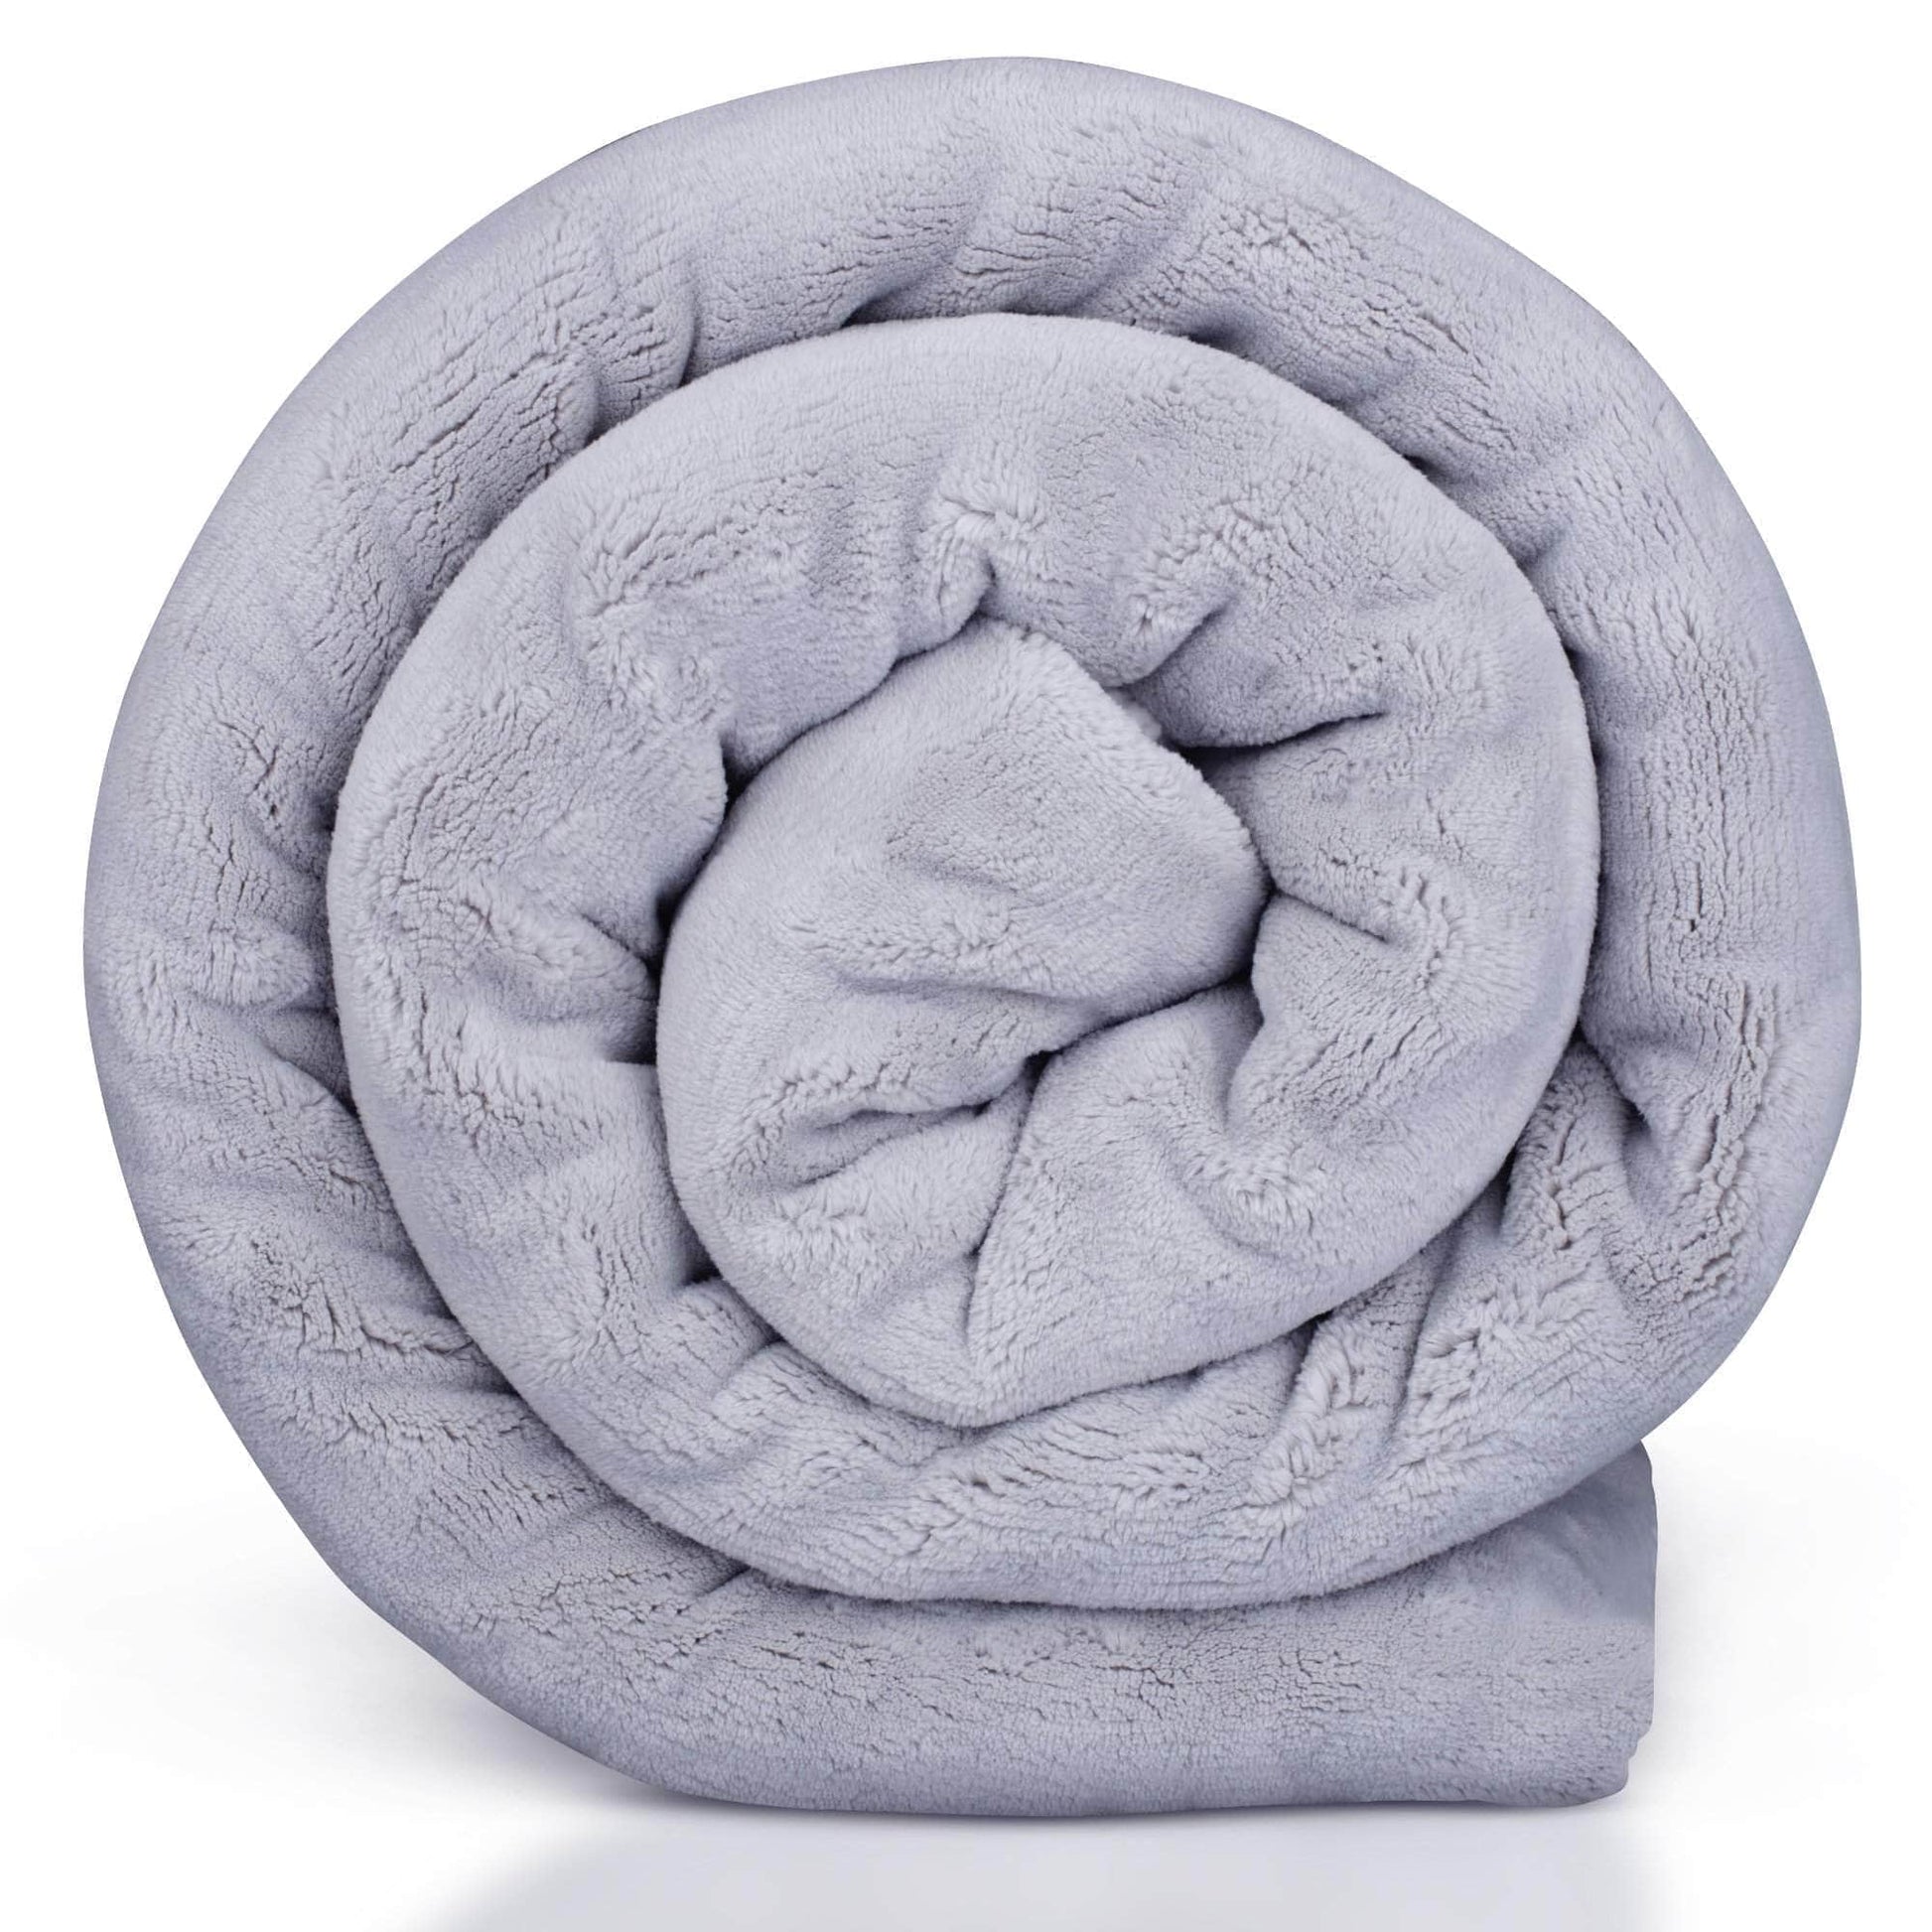 Hush Blankets Blanket Grey/White Hush 8lb Weighted Throw Sherpa Fleece Blanket - Available in 2 Colours